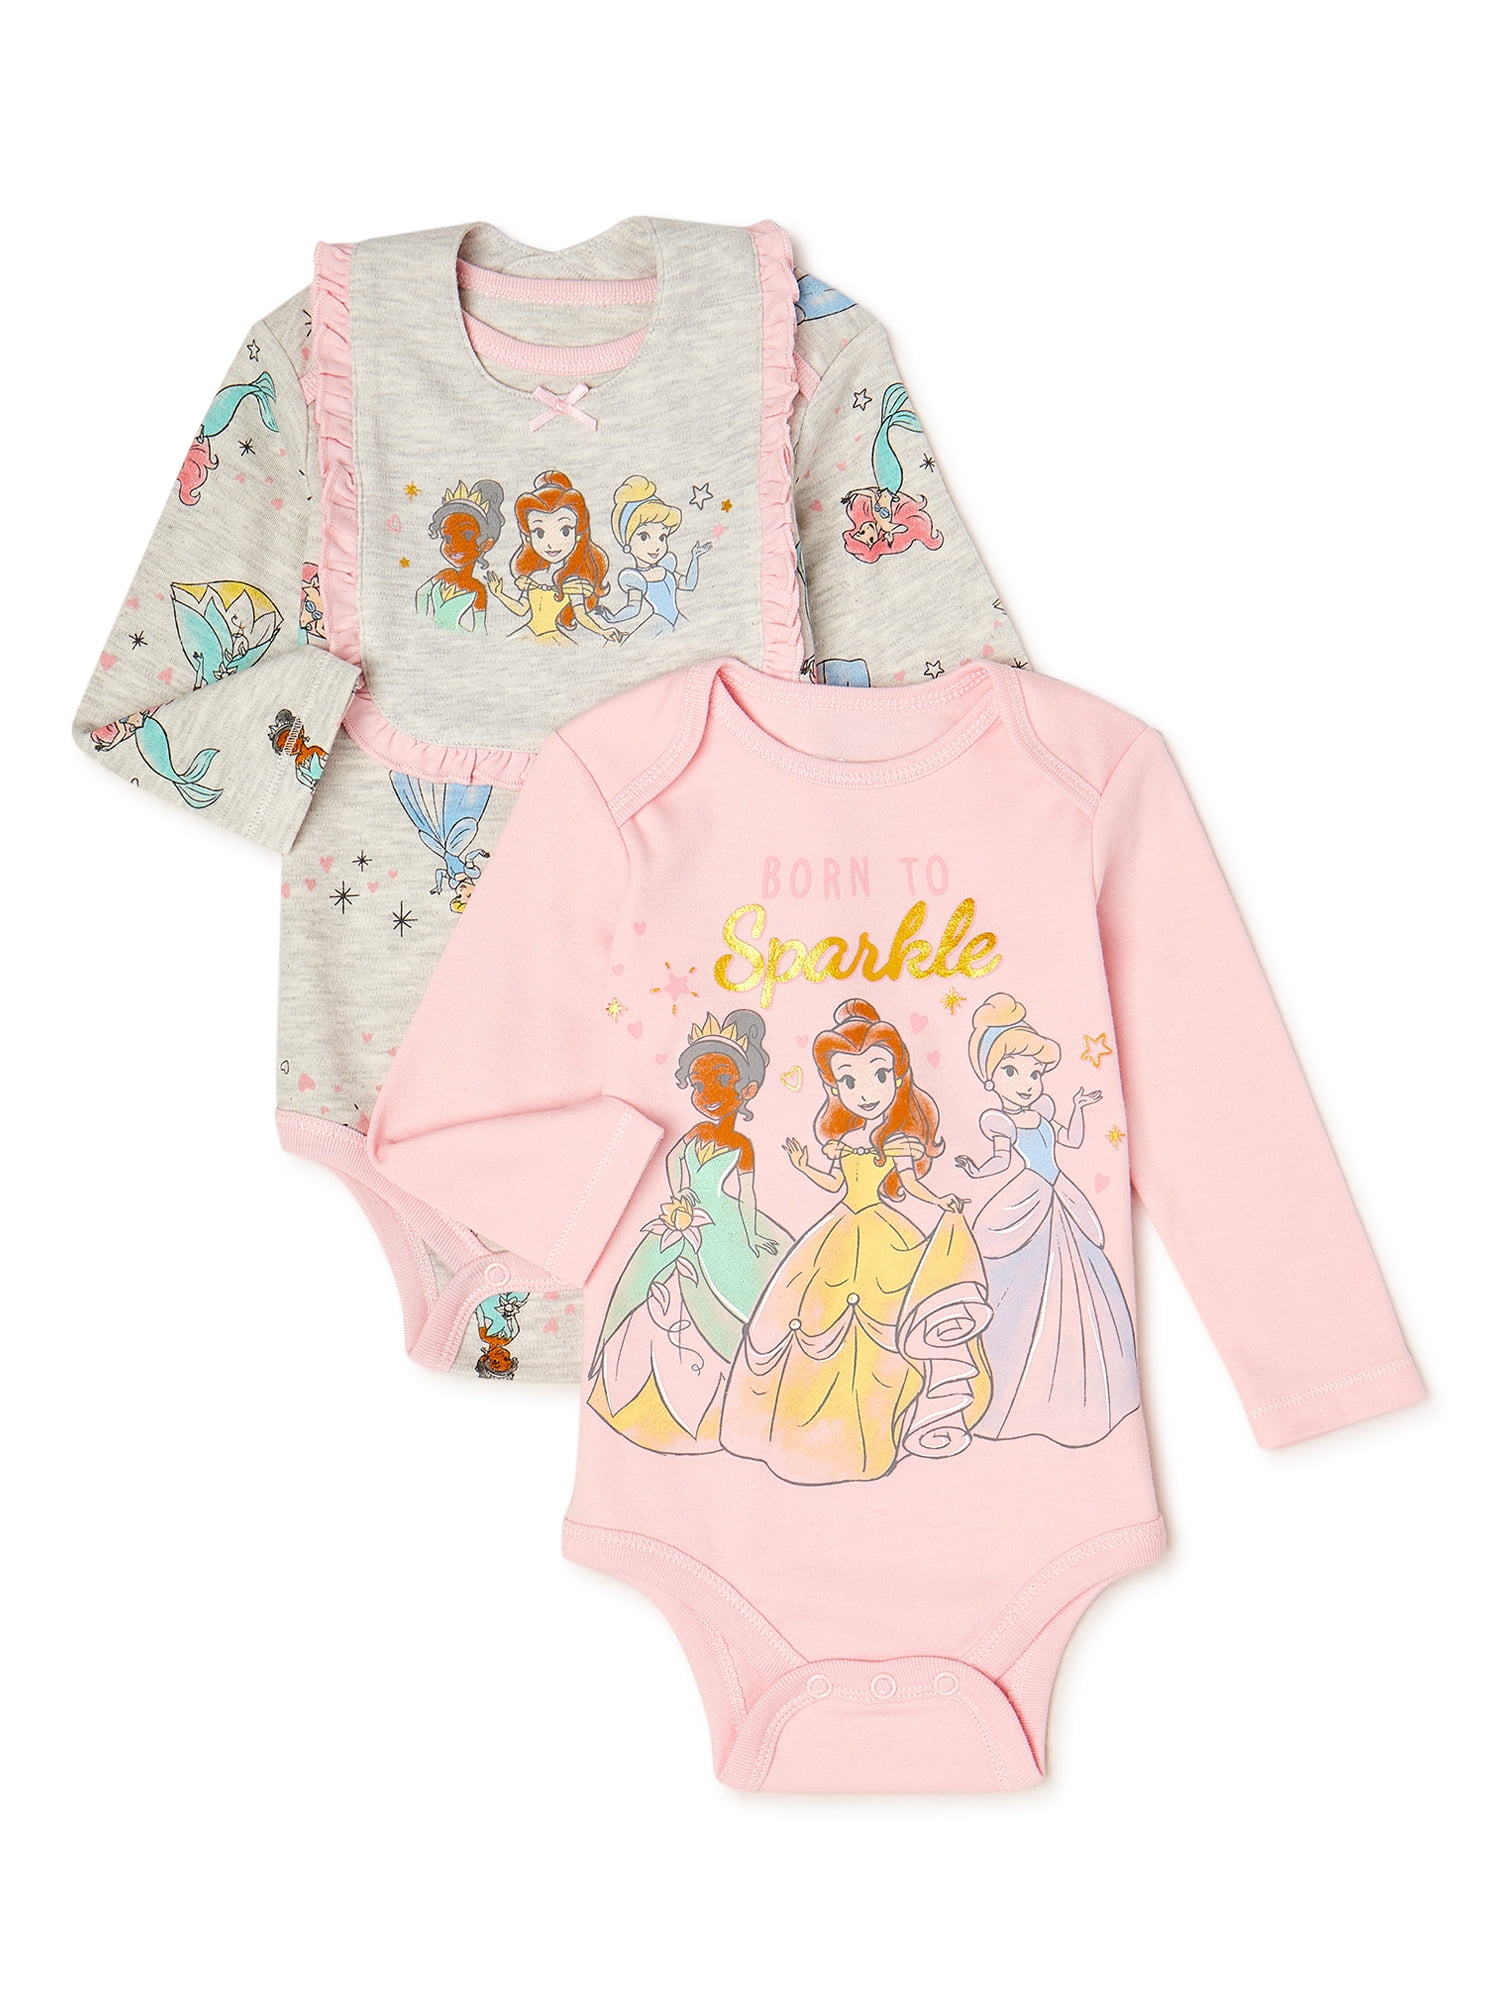 2/3 Official Disney DUMBO girls Pyjamas 4/5 years Age 18/24 months 3/4 